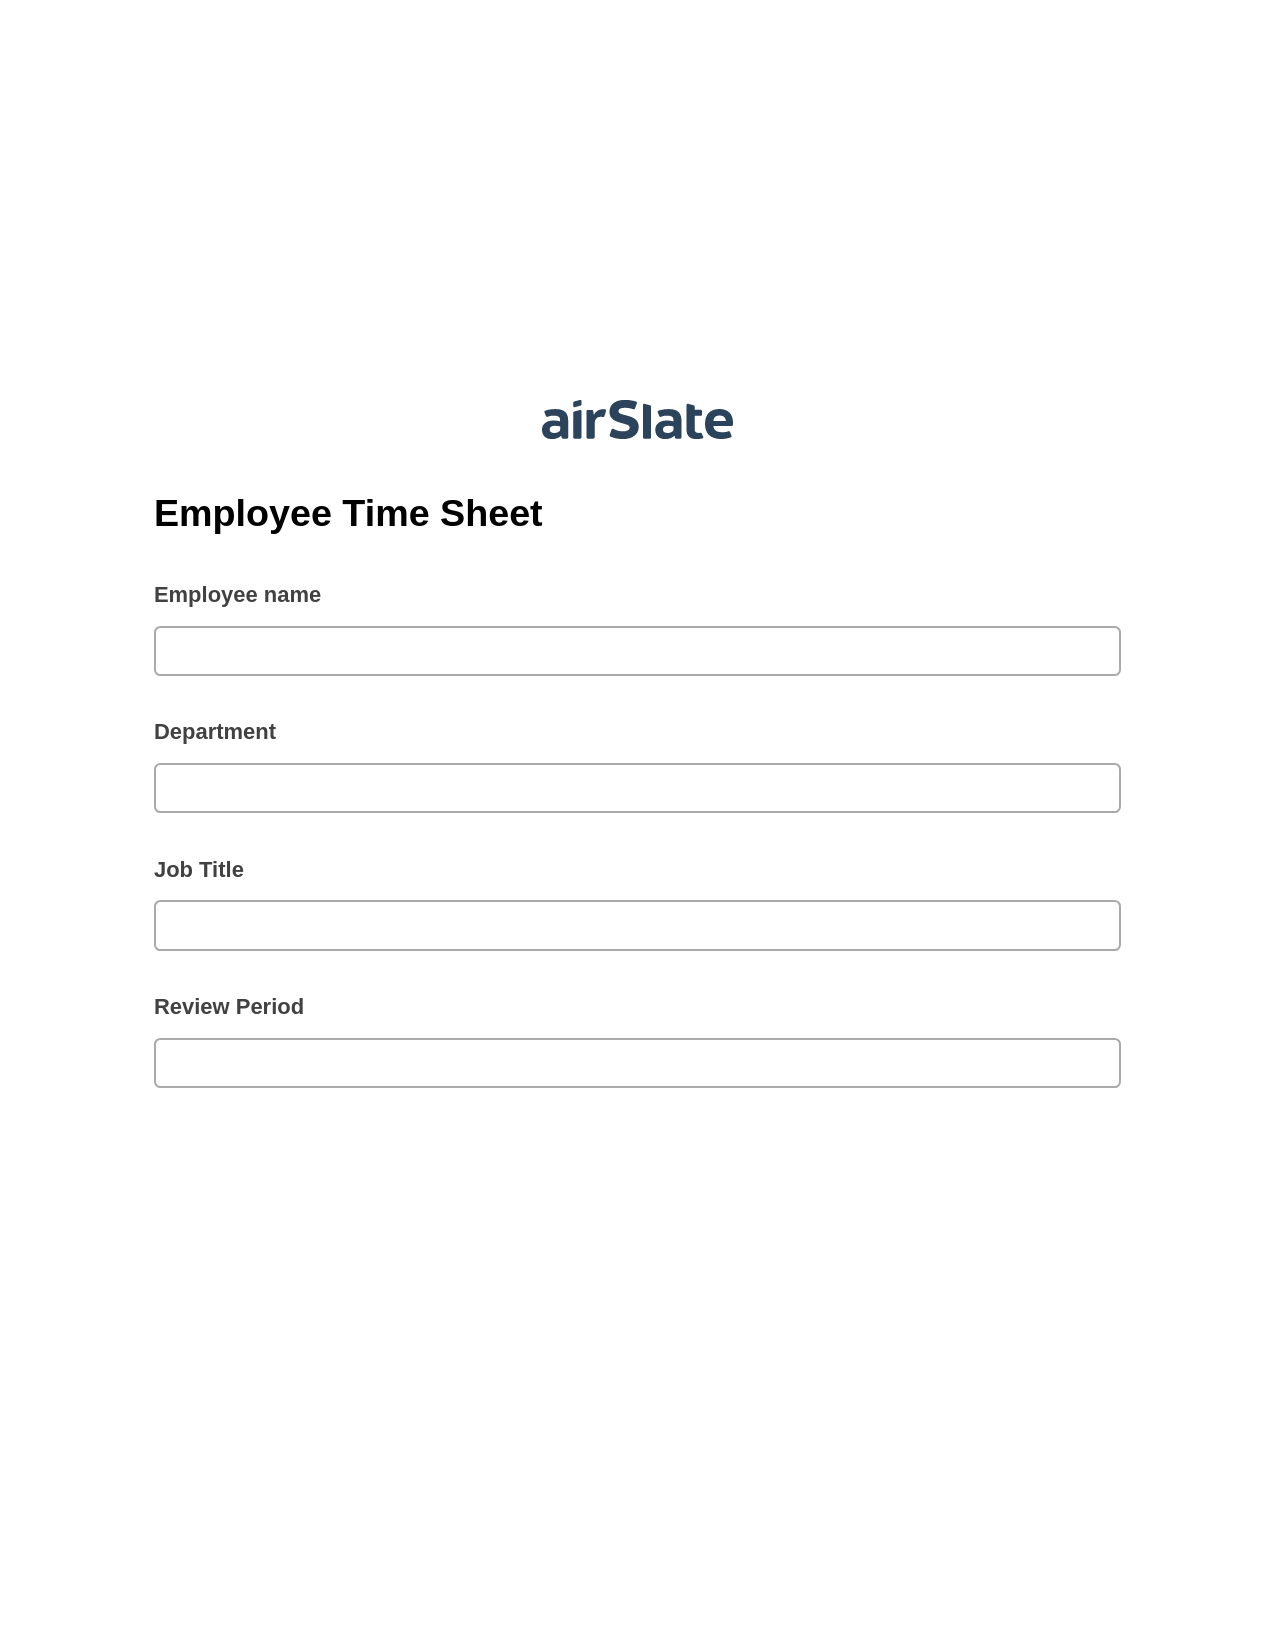 Employee Time Sheet Pre-fill from Salesforce Records with SOQL Bot, Custom Field's Value Bot, Archive to SharePoint Folder Bot